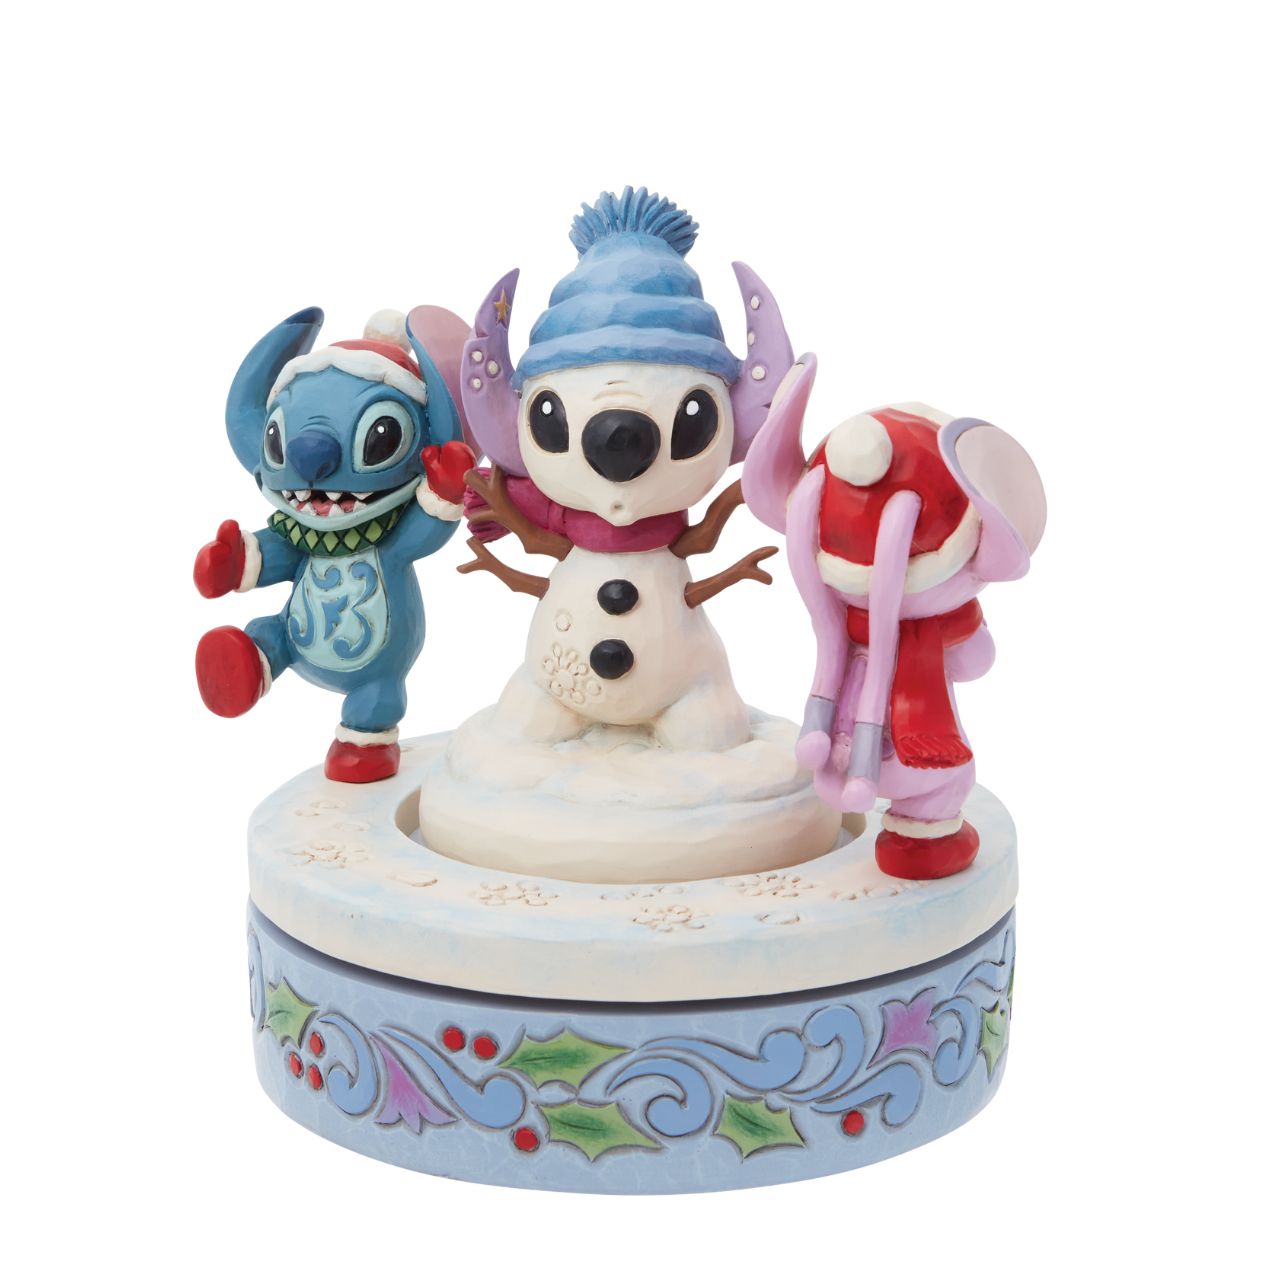 Disney Stitch & Angel Rotating Figurine by Jim Shore  Disney's Stitch and Angel are playing in the snow with their extra special Snowman this Christmas. Hand rotatable, they chase each other round and round. Designed by award winning artist Jim Shore, hand crafted from high quality cast stone and hand painted.